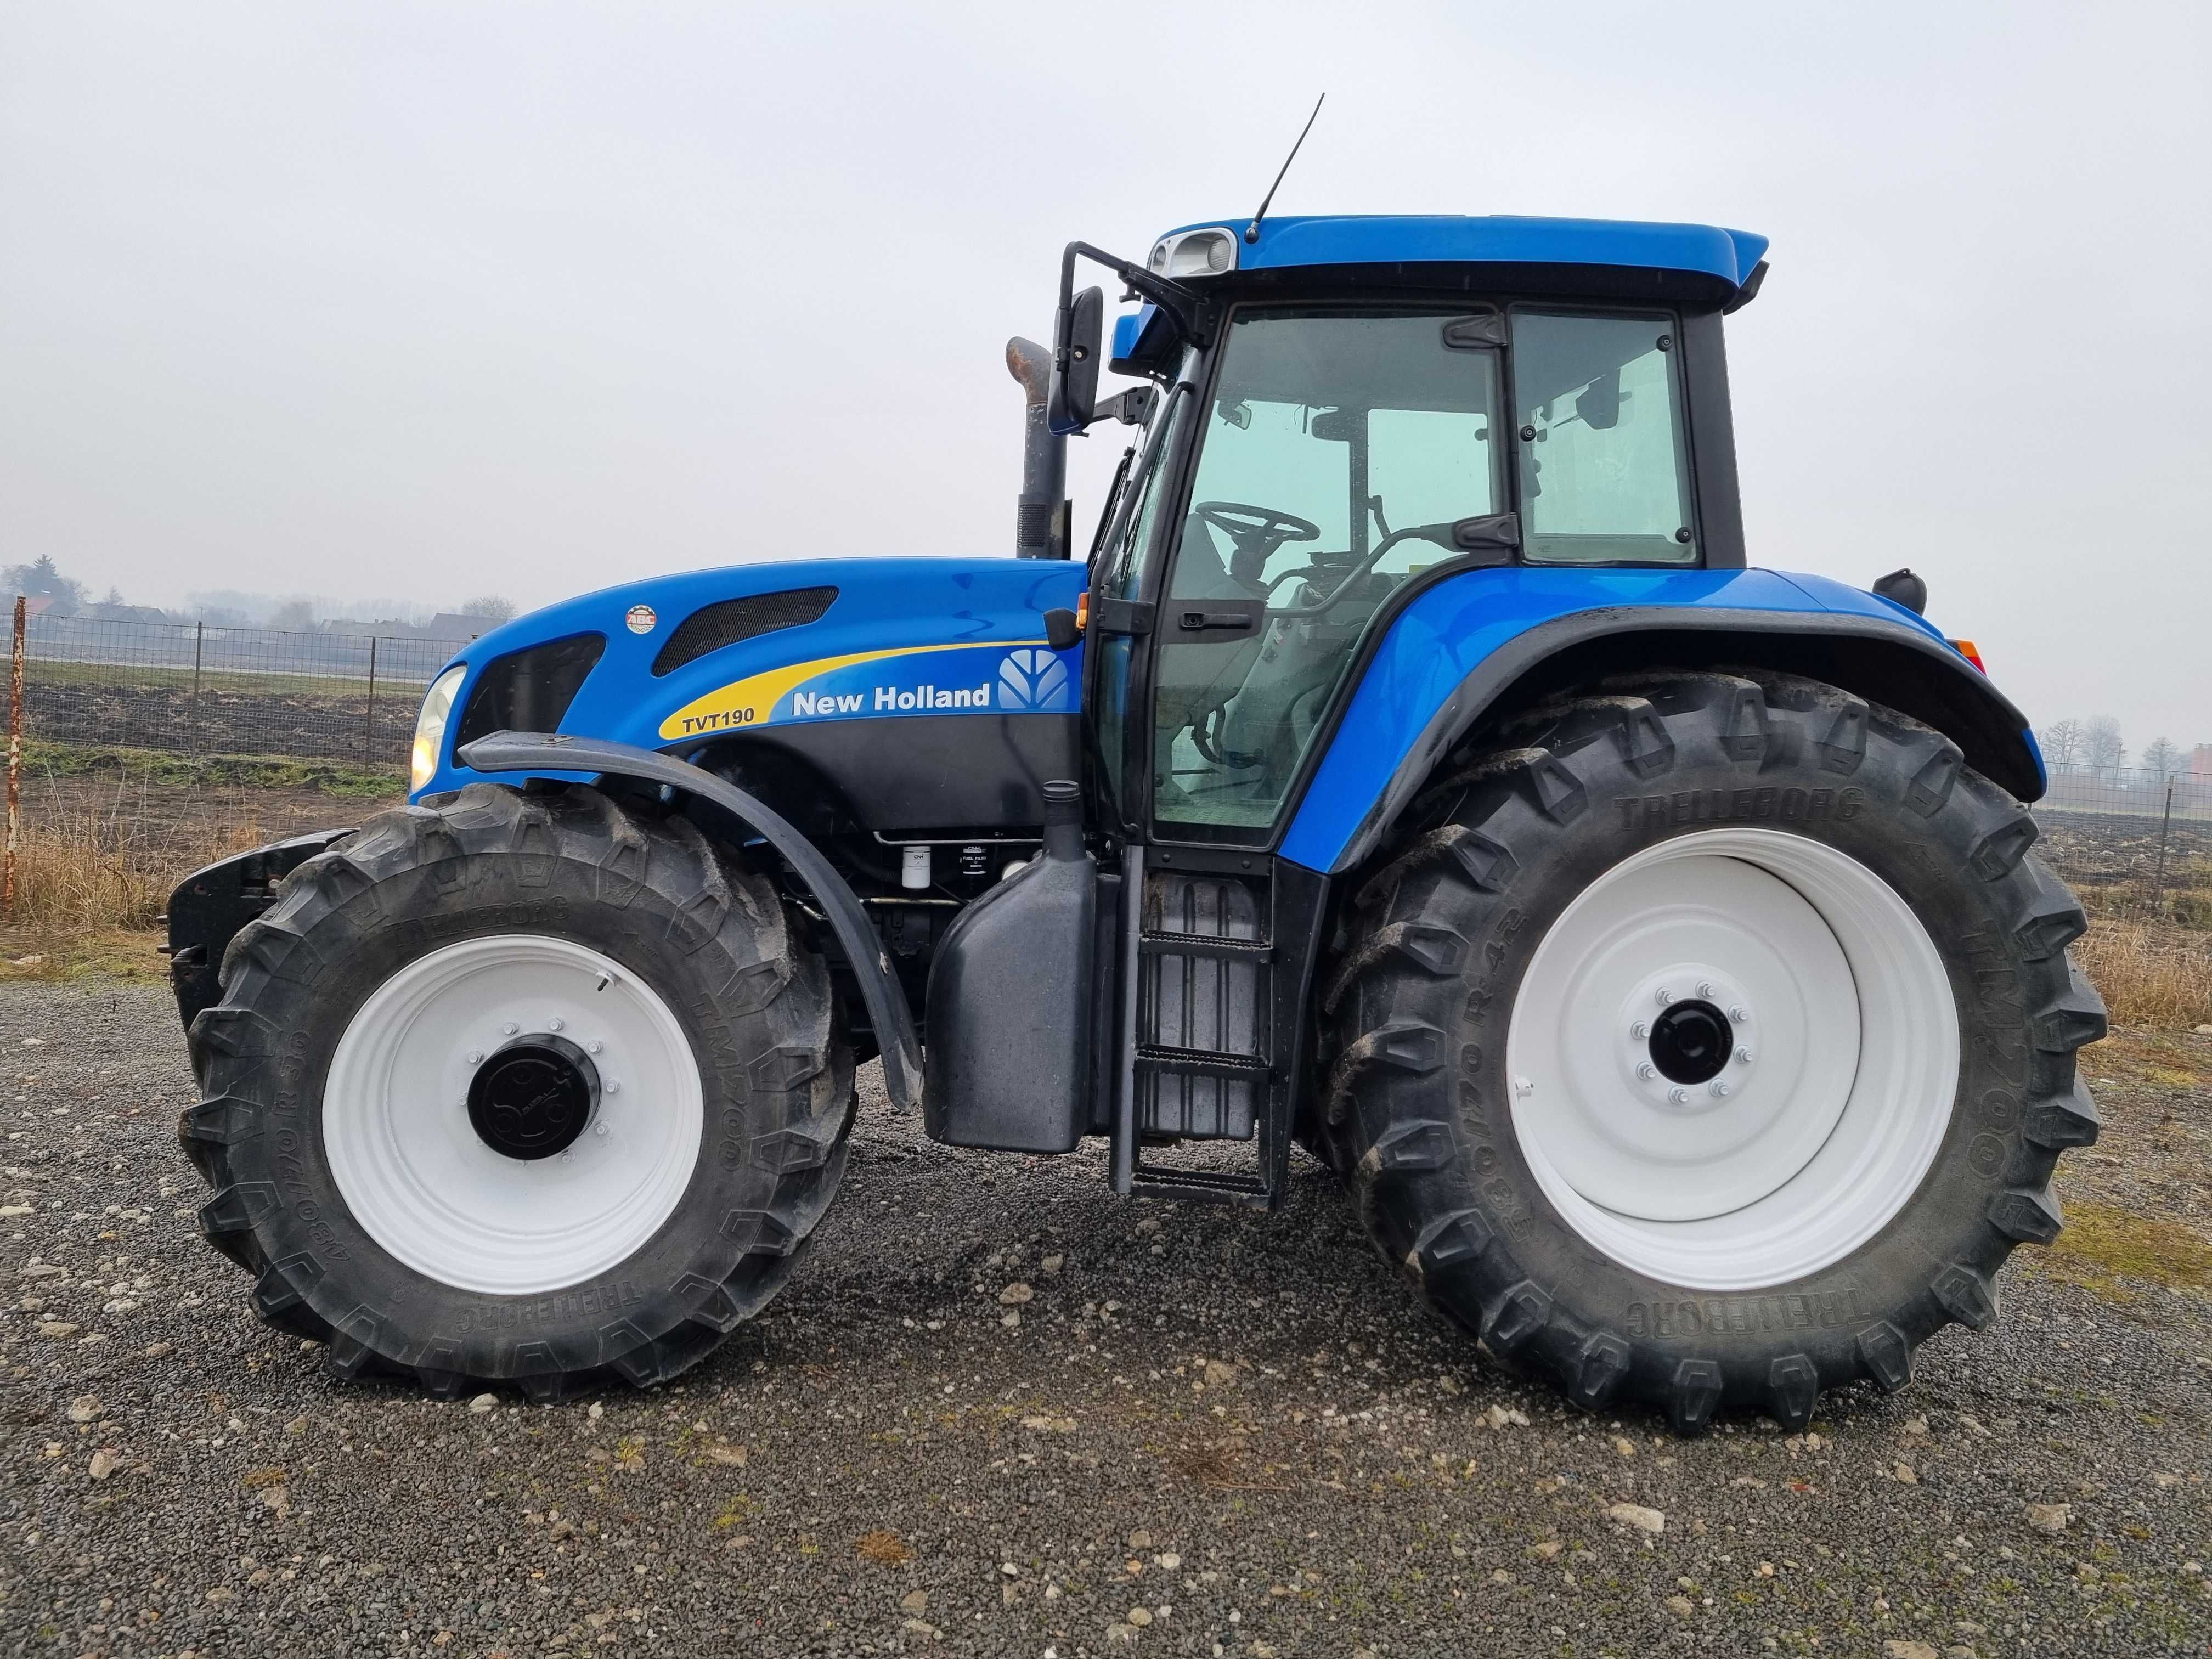 New Holland TVT 190 / imp. Germania / 8366 h lucrate !!!